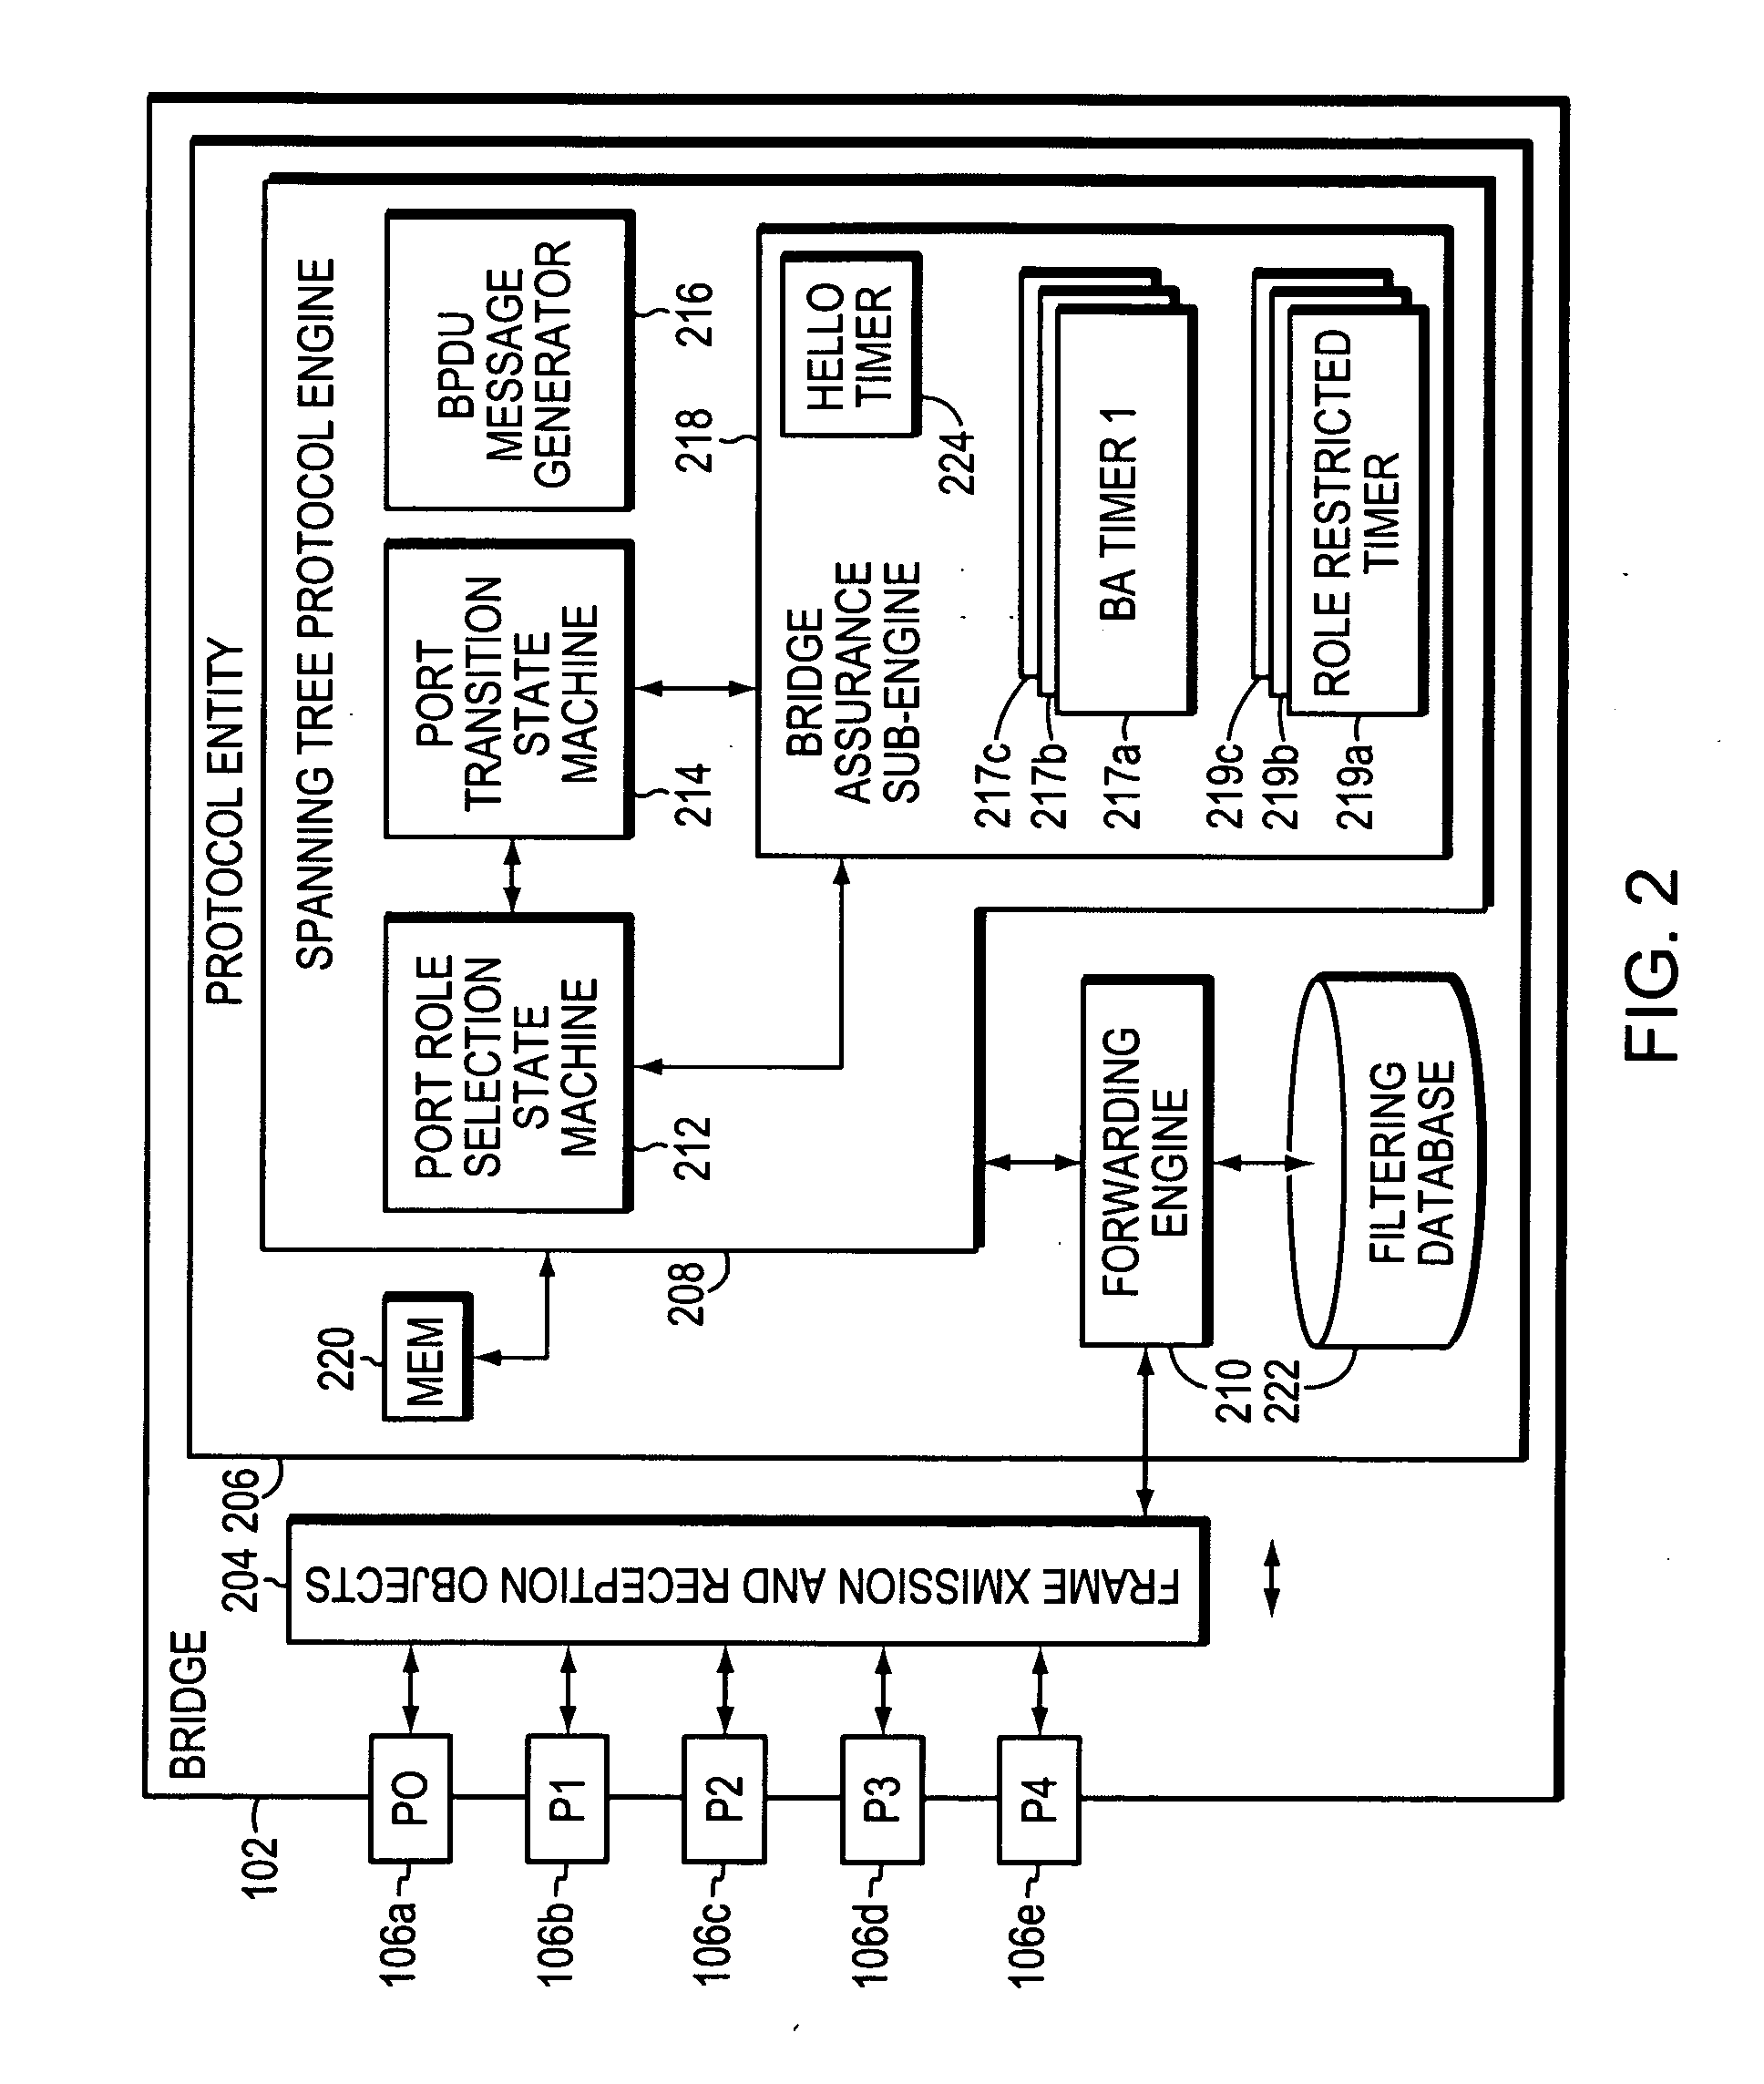 System and method for assuring the operation of network devices in bridged networks